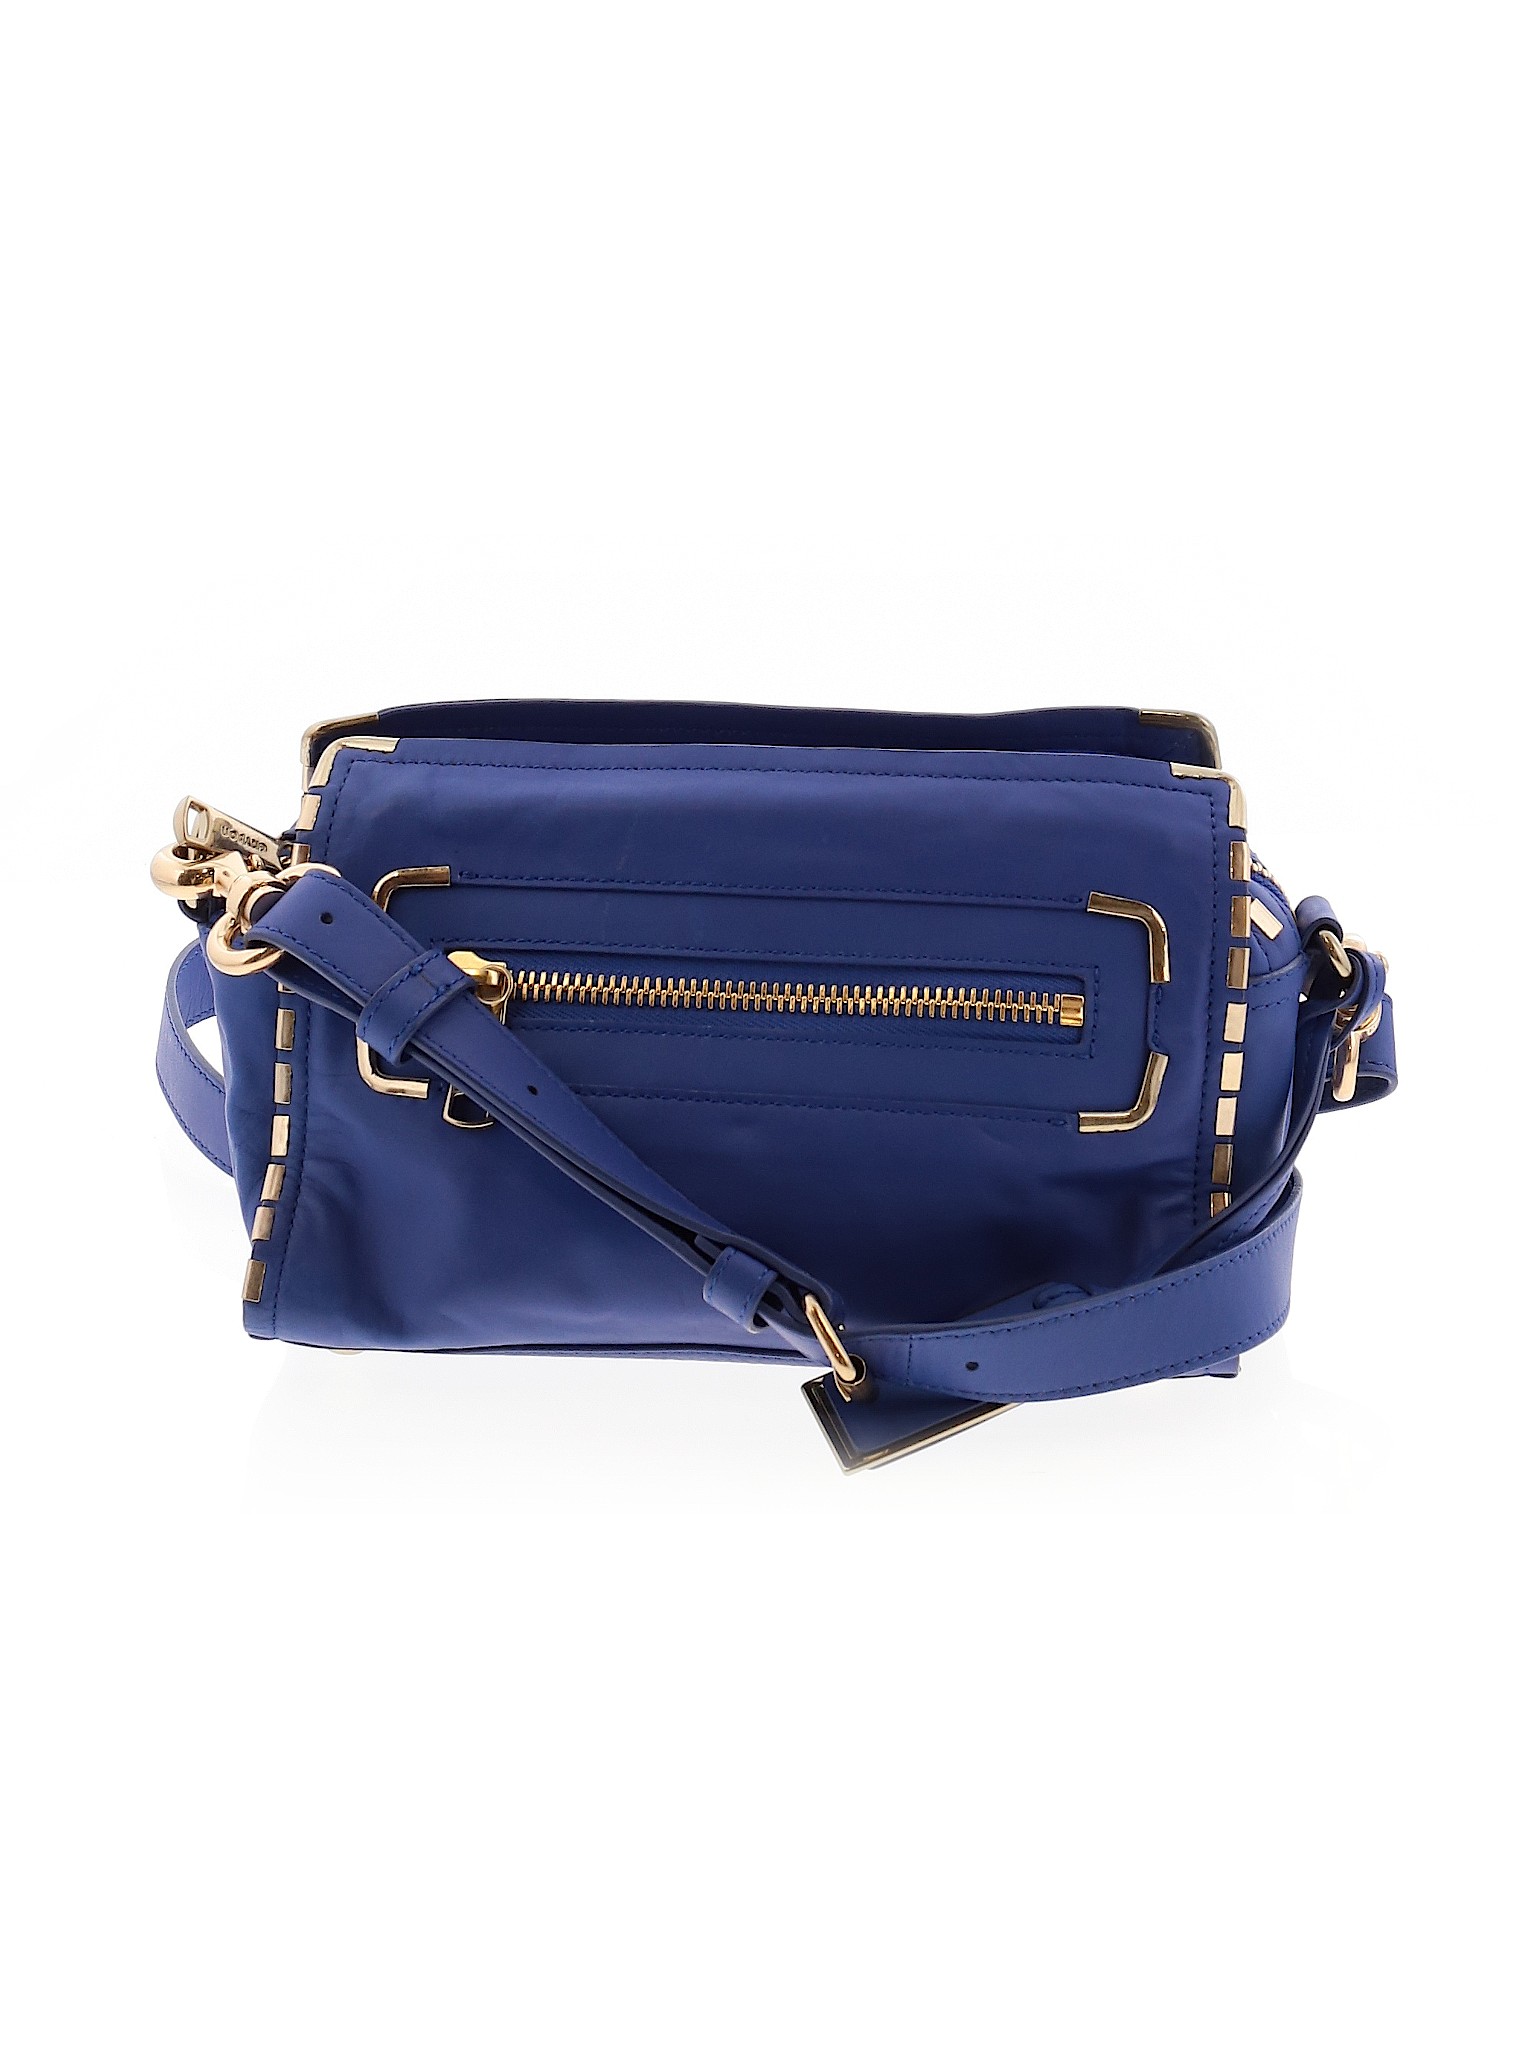 Gryson 100% Leather Solid Blue Leather Crossbody Bag One Size - 70% off ...